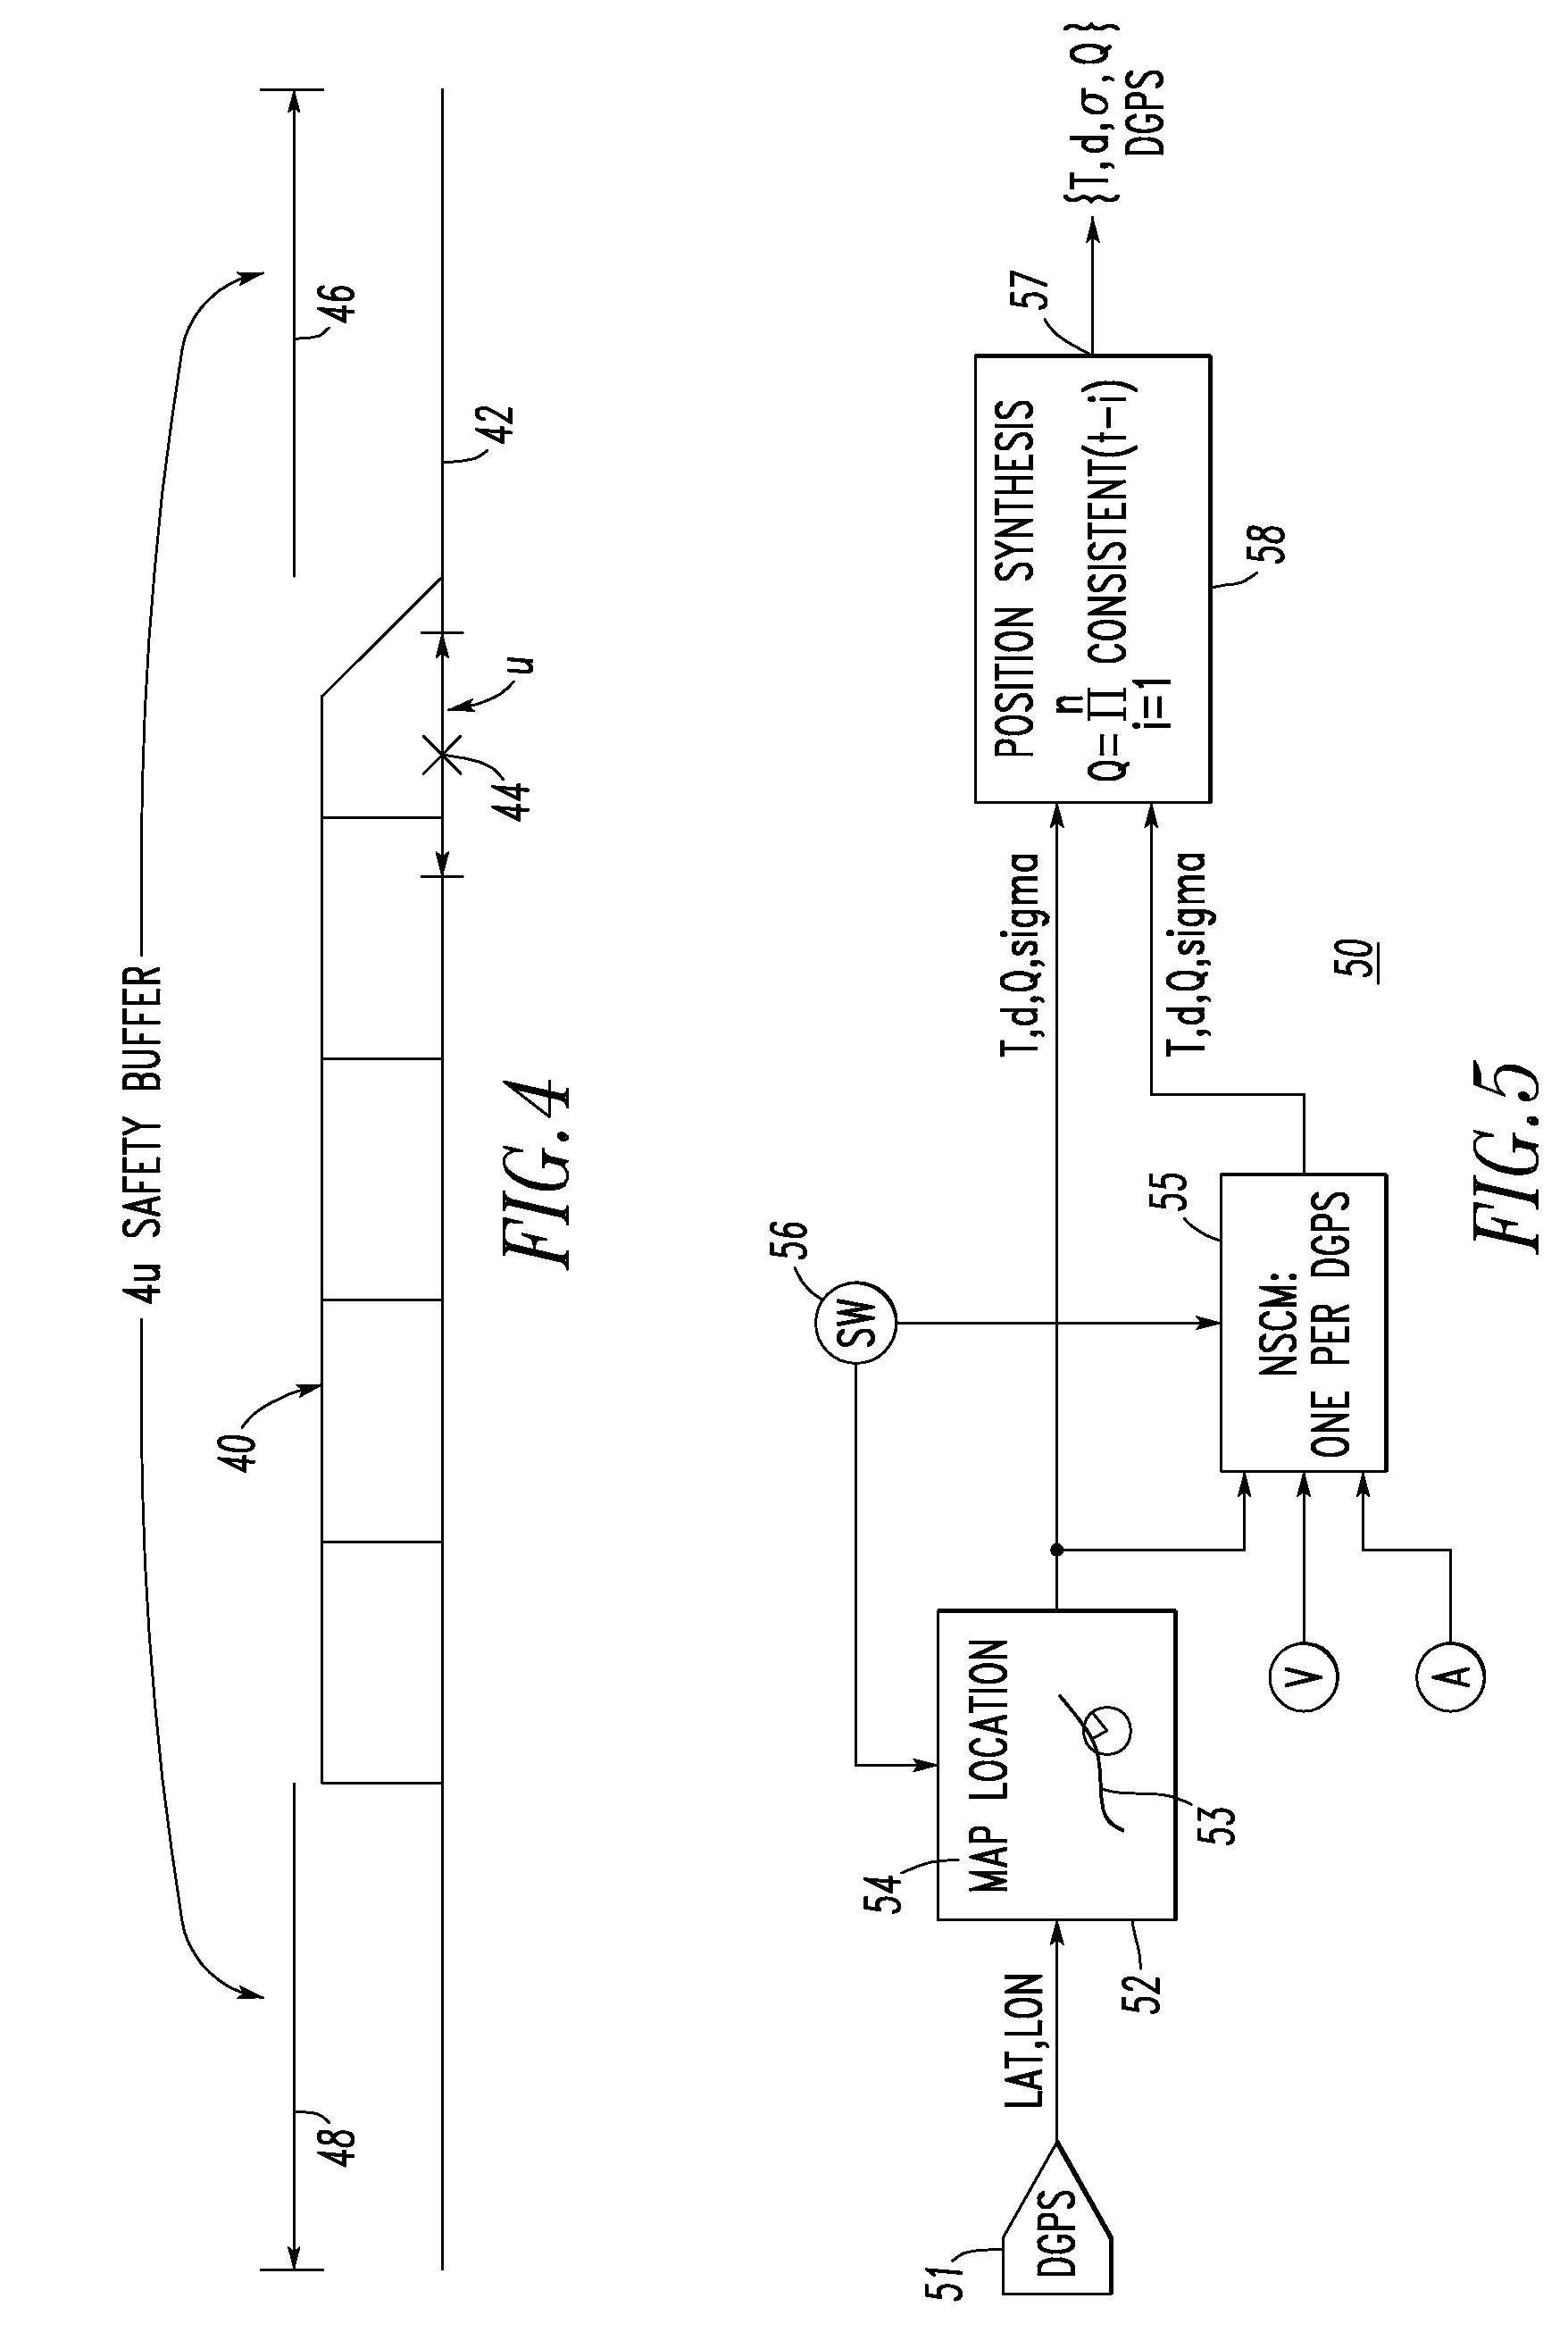 System and method for vitally determining position and position uncertainty of a railroad vehicle employing diverse sensors including a global positioning system sensor